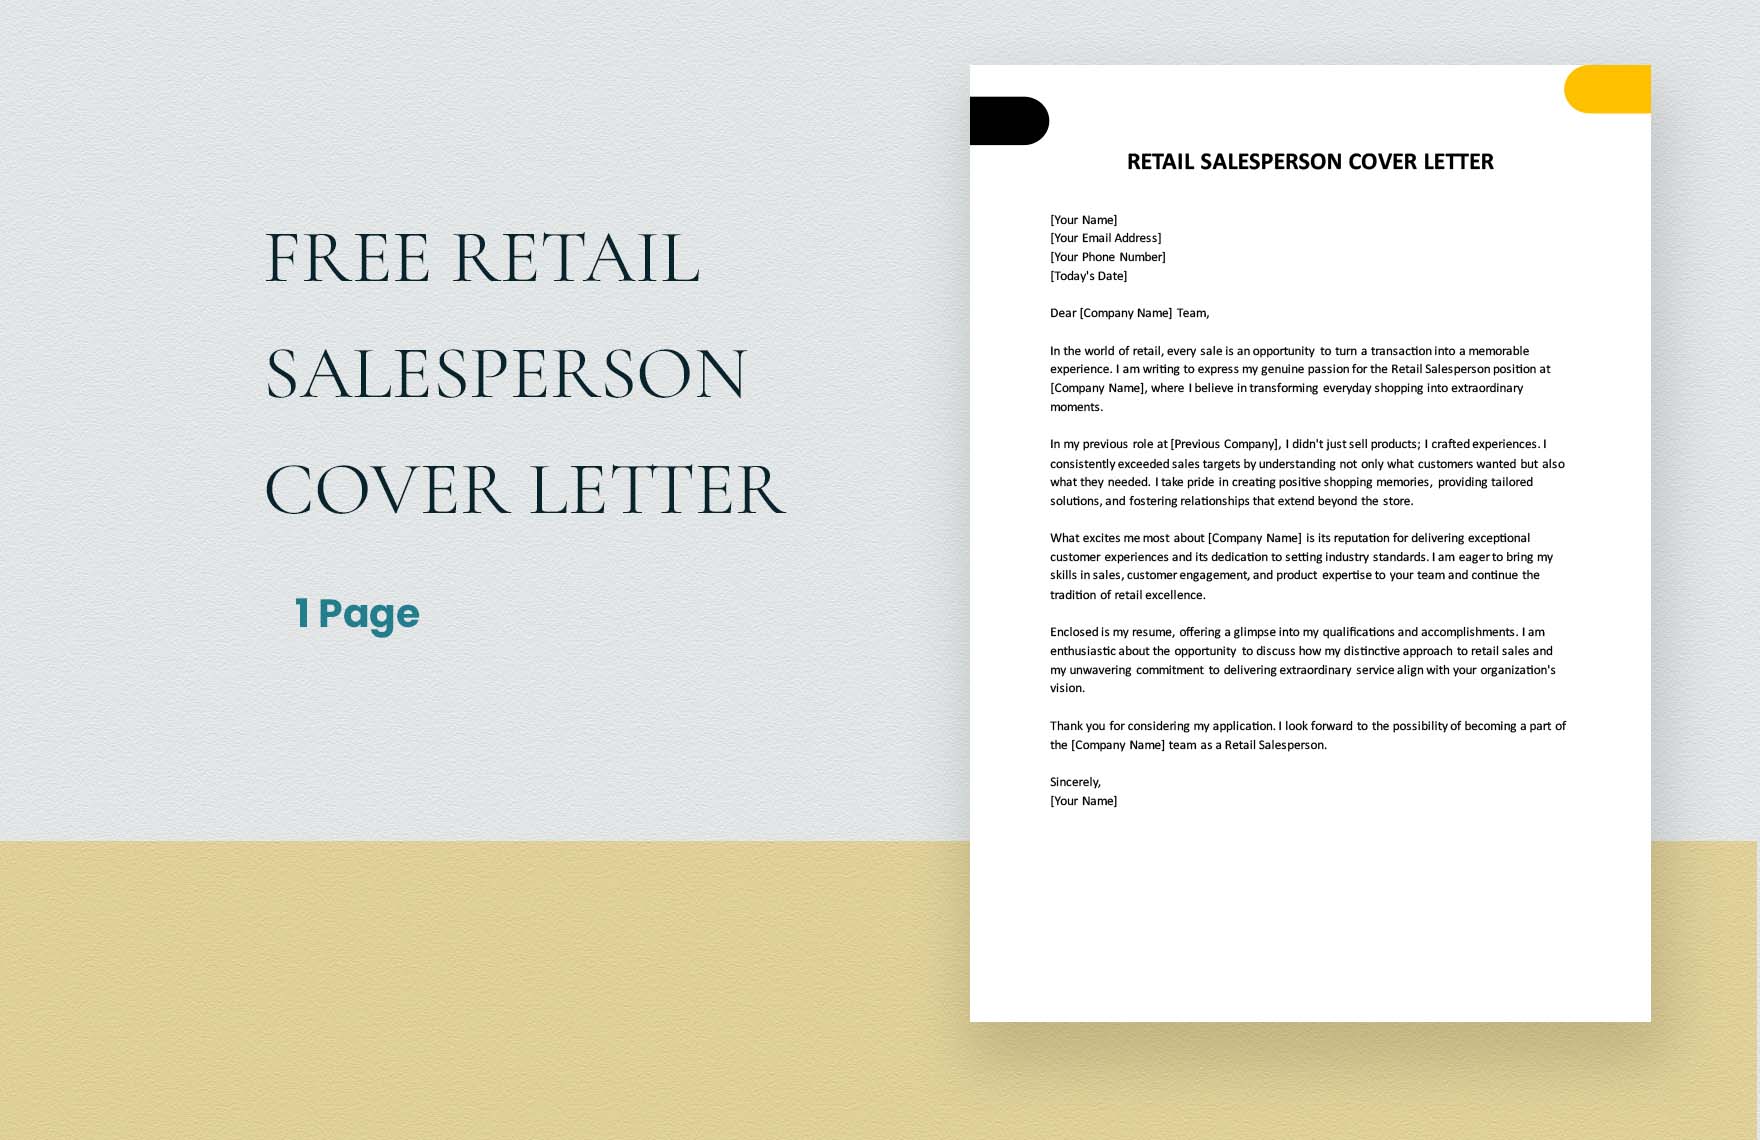 Retail Salesperson Cover Letter in Word, Google Docs, PDF